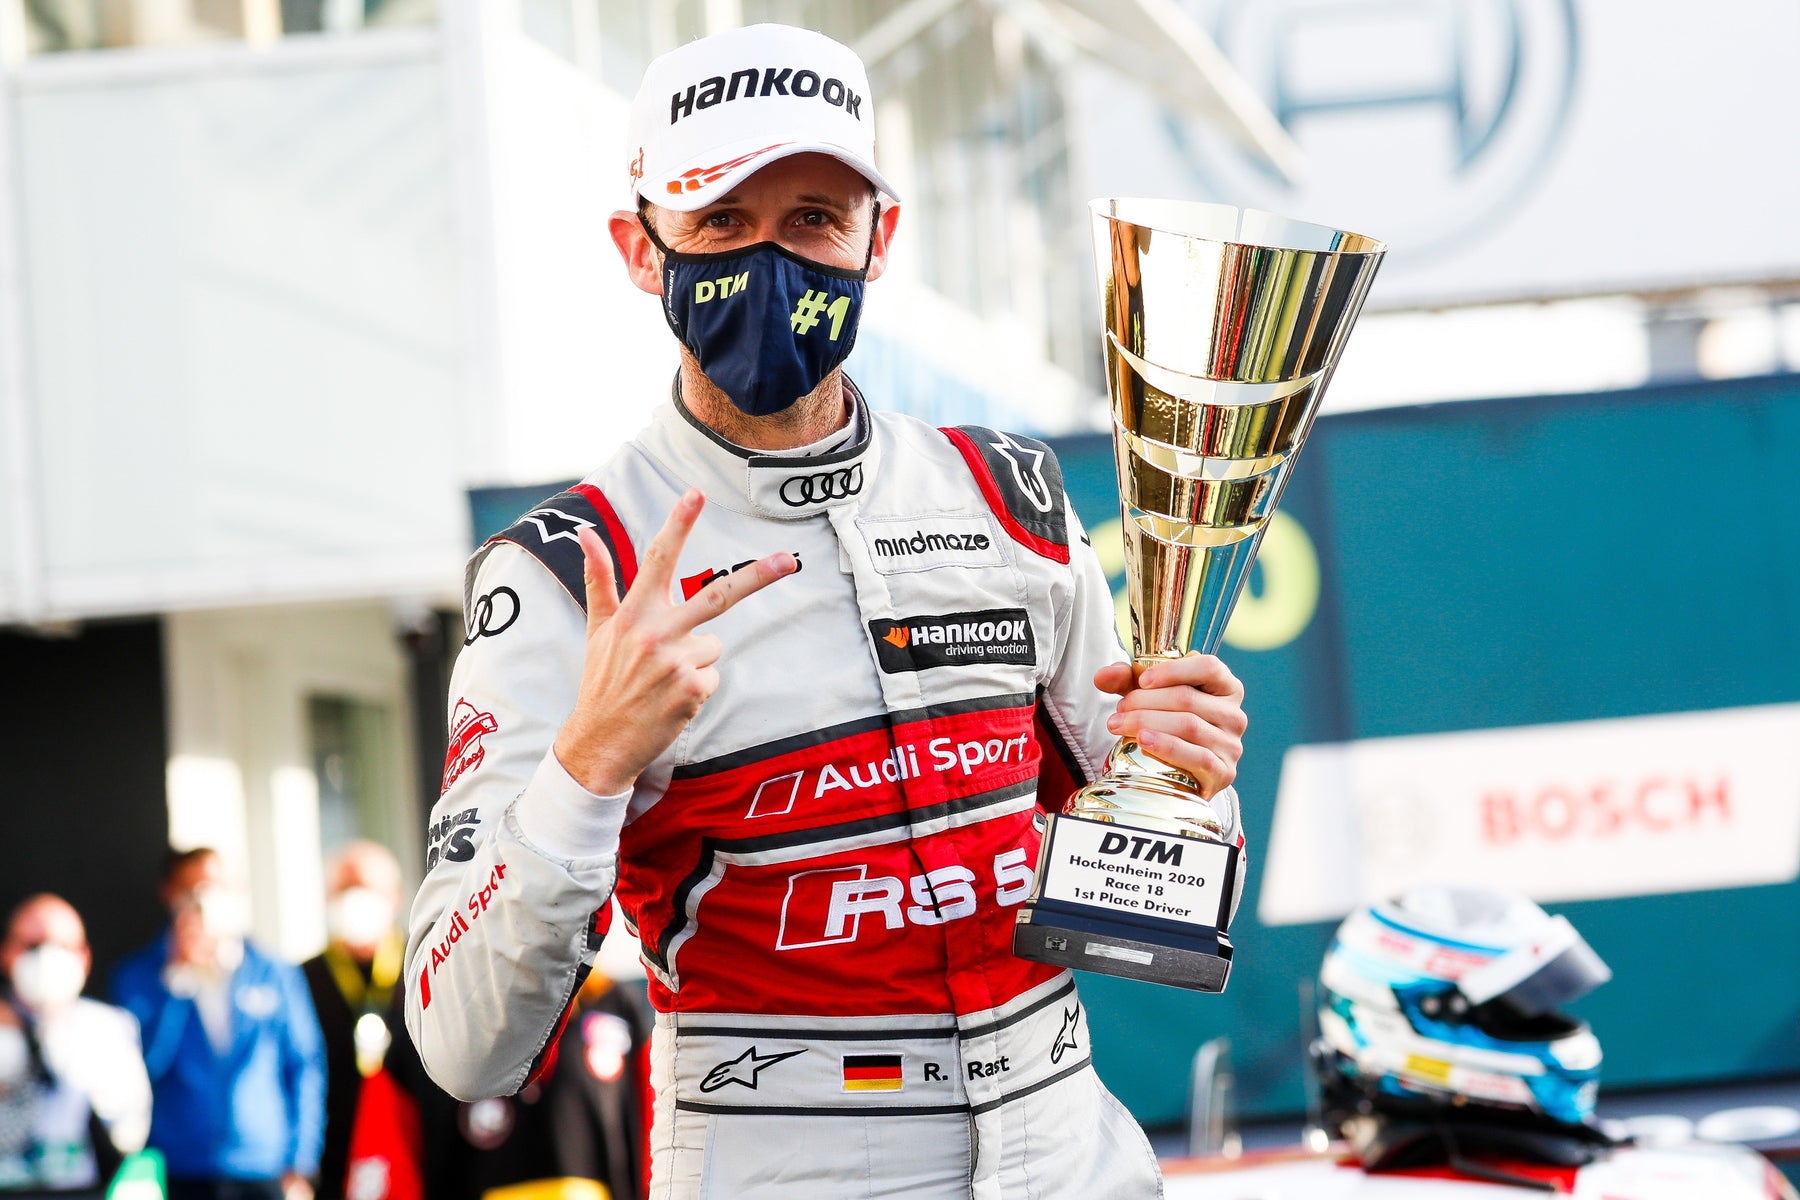 RENE RAST WRITES A NEW CHAPTER IN DTM AFTER POWERING TO HIS THIRD DRIVERS TITLE AT HOCKENHEIM